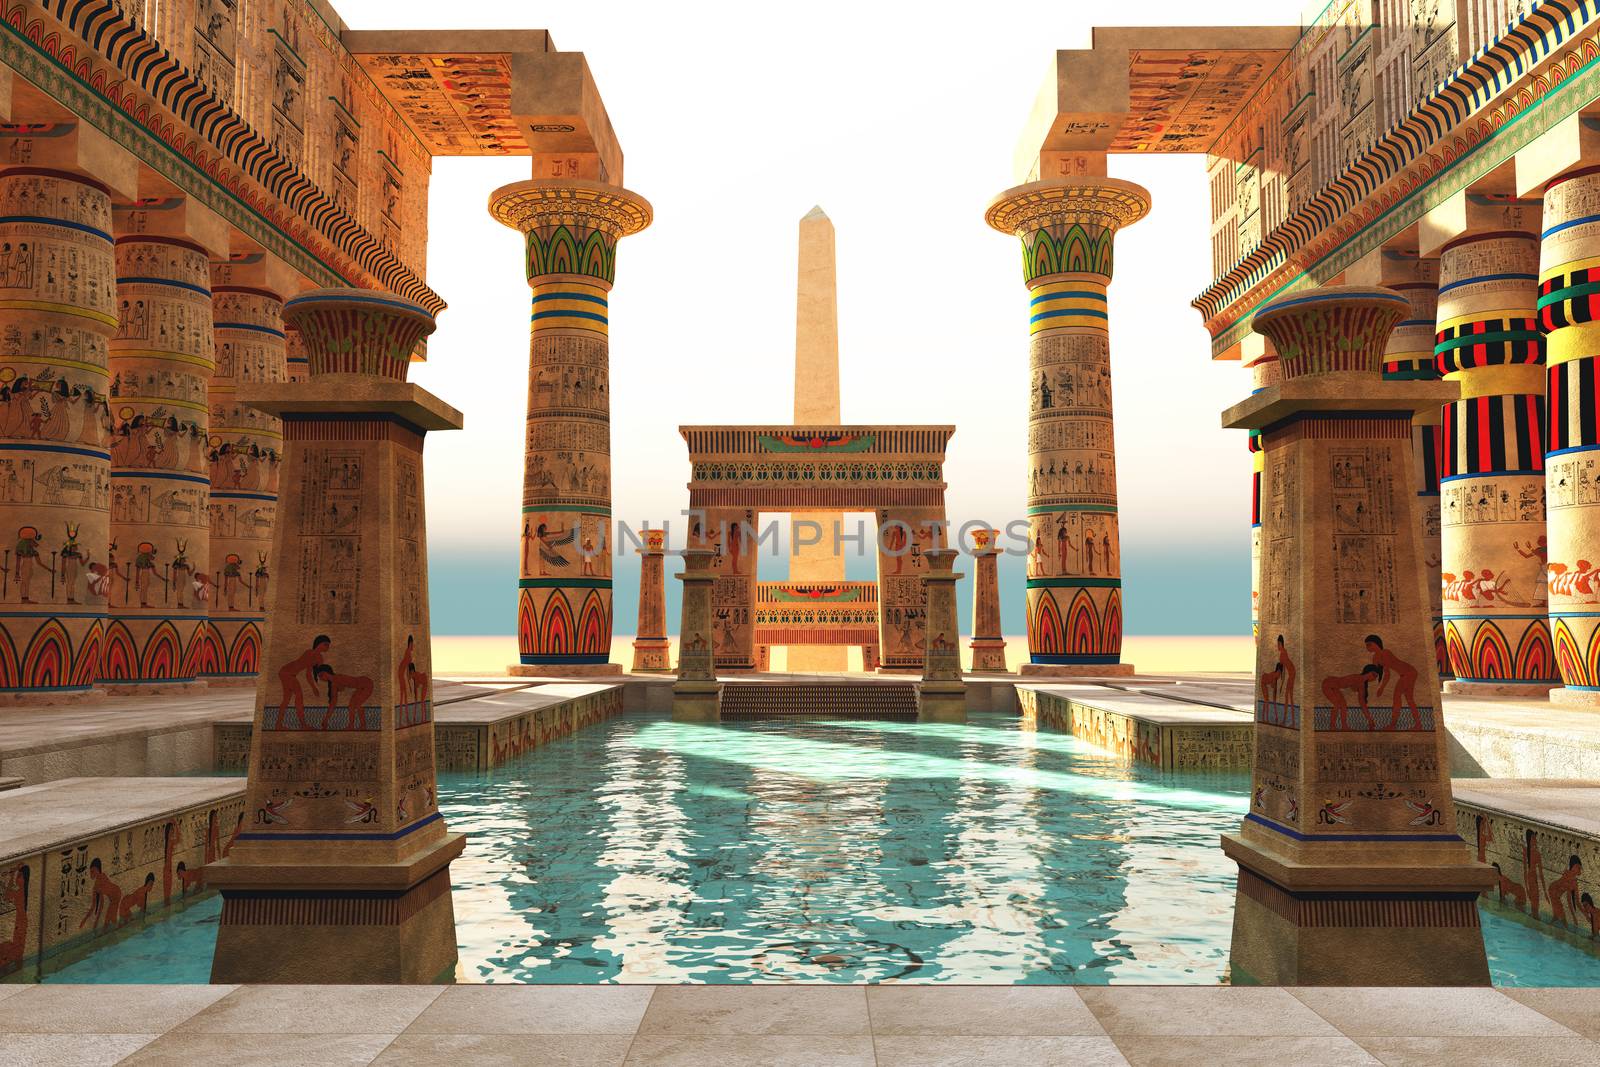 Ornate Egyptian architecture with hieroglyphs surround a pool in historical Egypt with an obelisk standing guard.